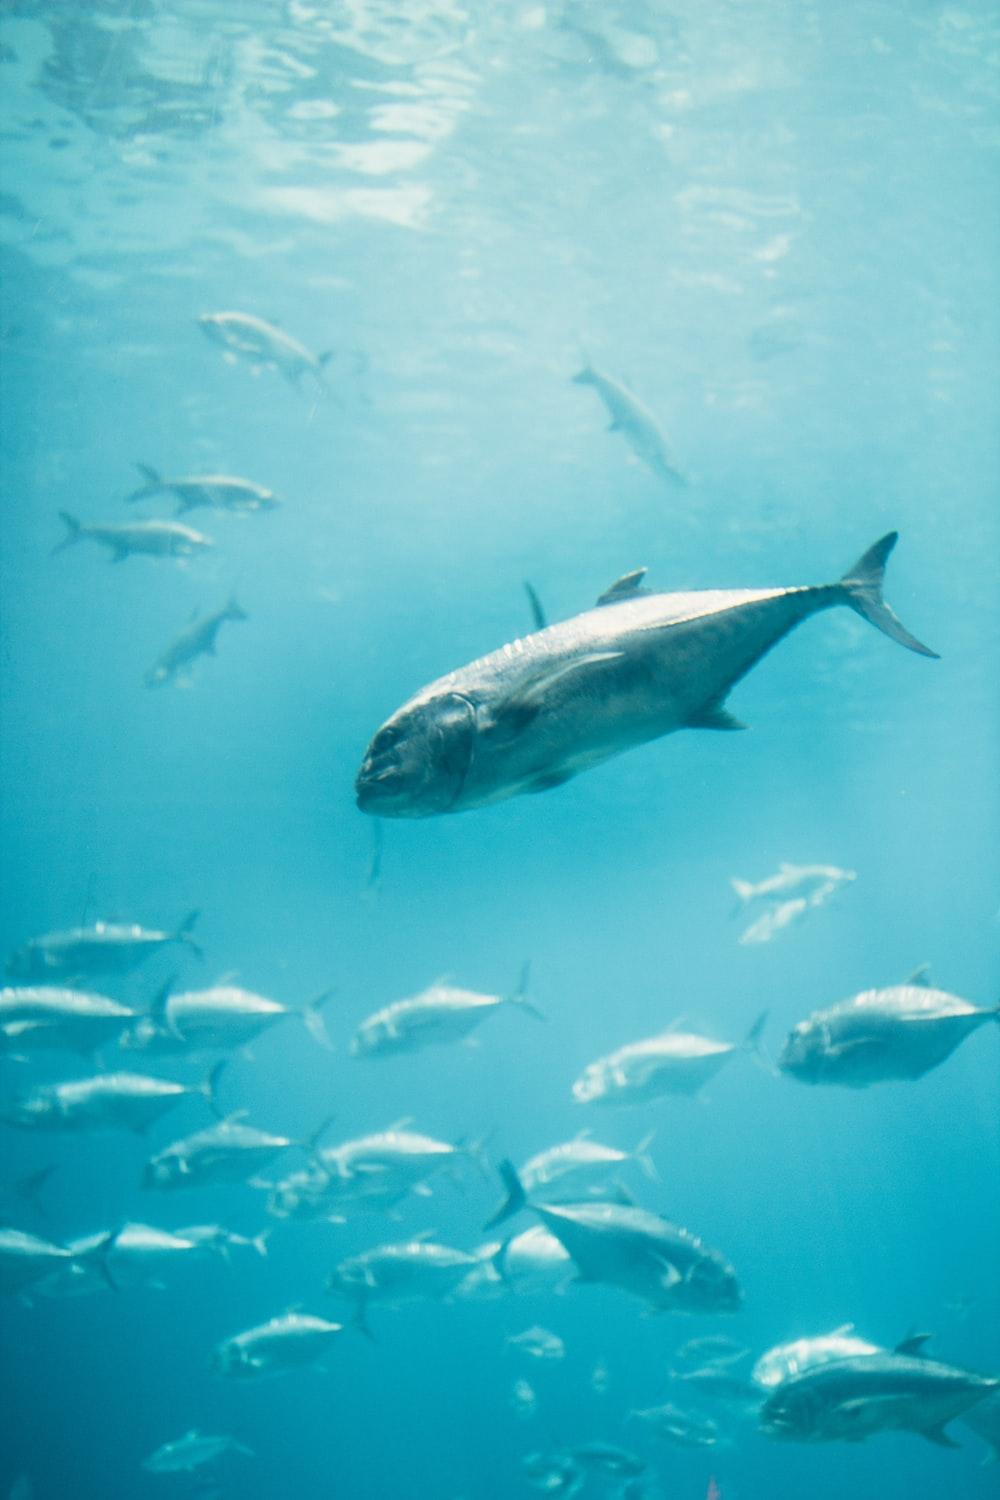 Yellowfin Tuna Picture. Download Free Image